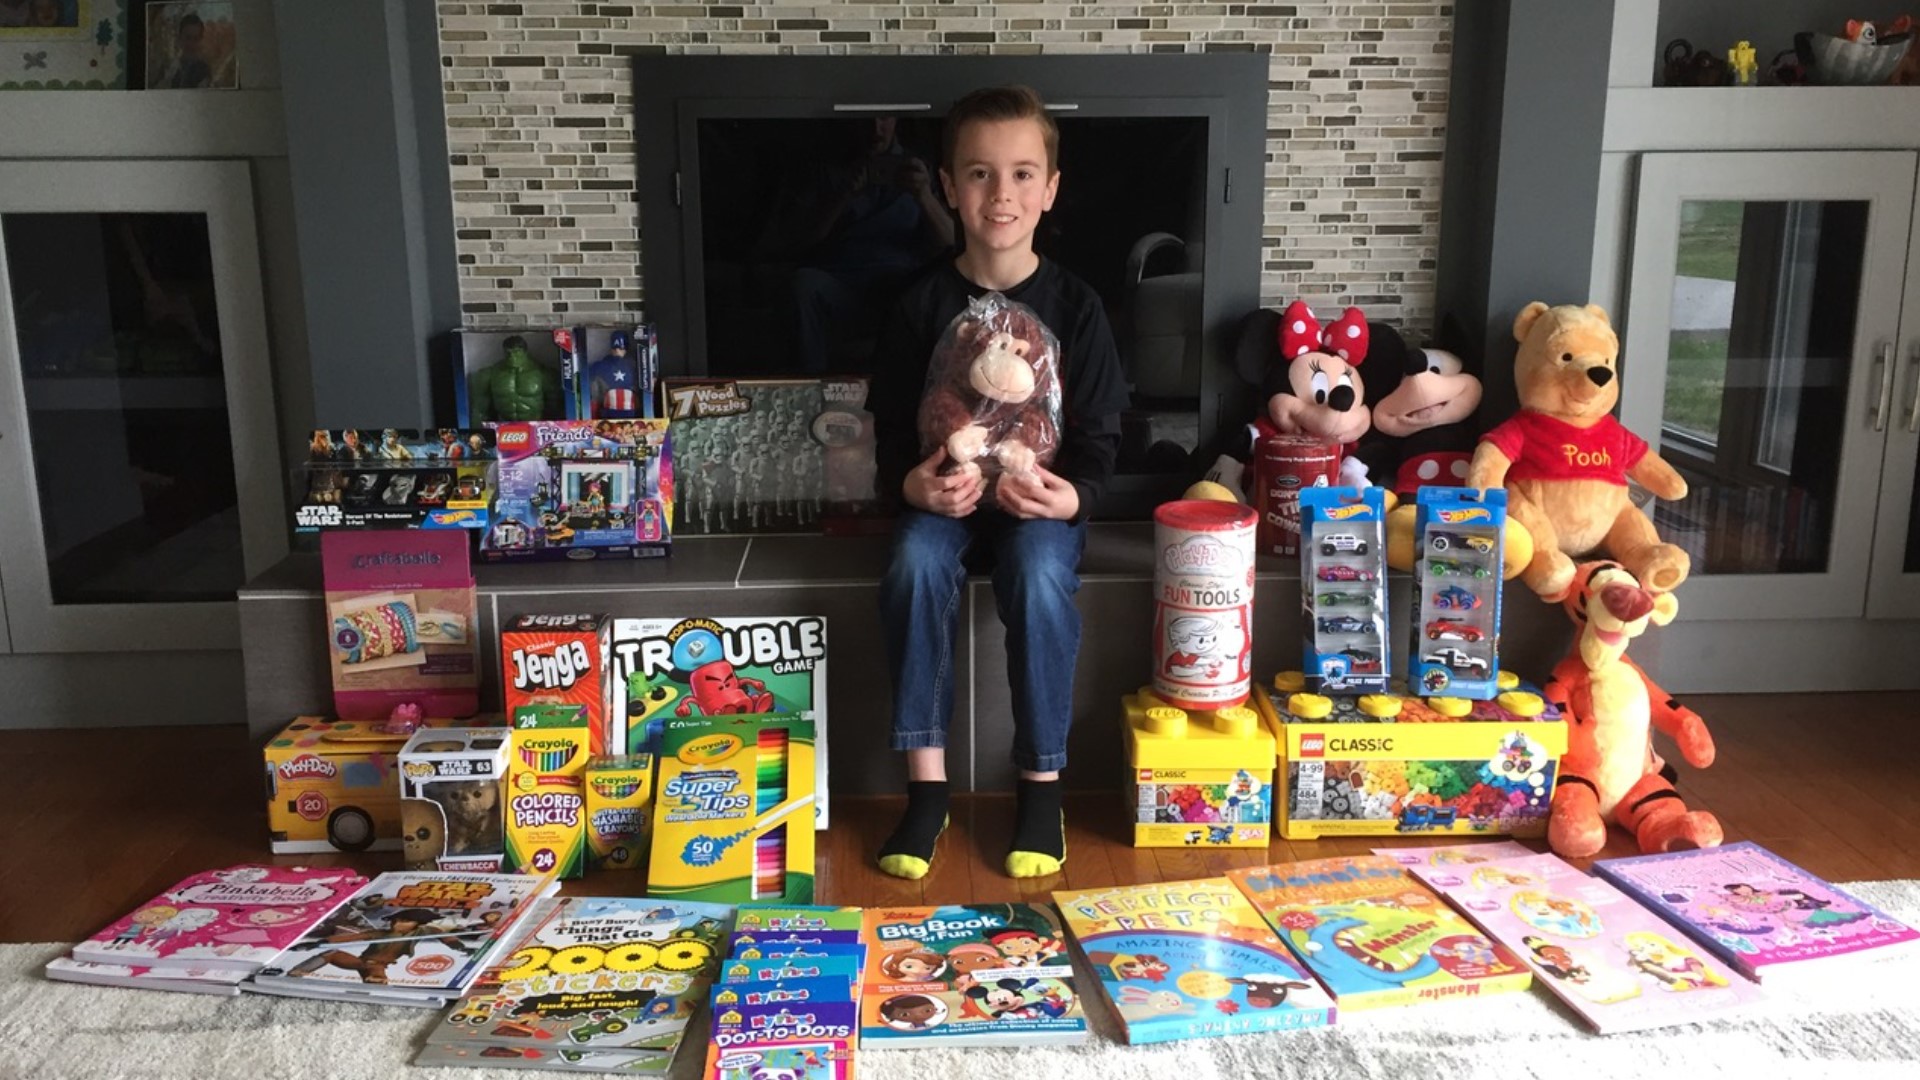 11-year-old Brandon Bemis says he didn't feel like he needed more gifts and he wanted to give to others. This year, Mott Children's Hospital will see his generosity.